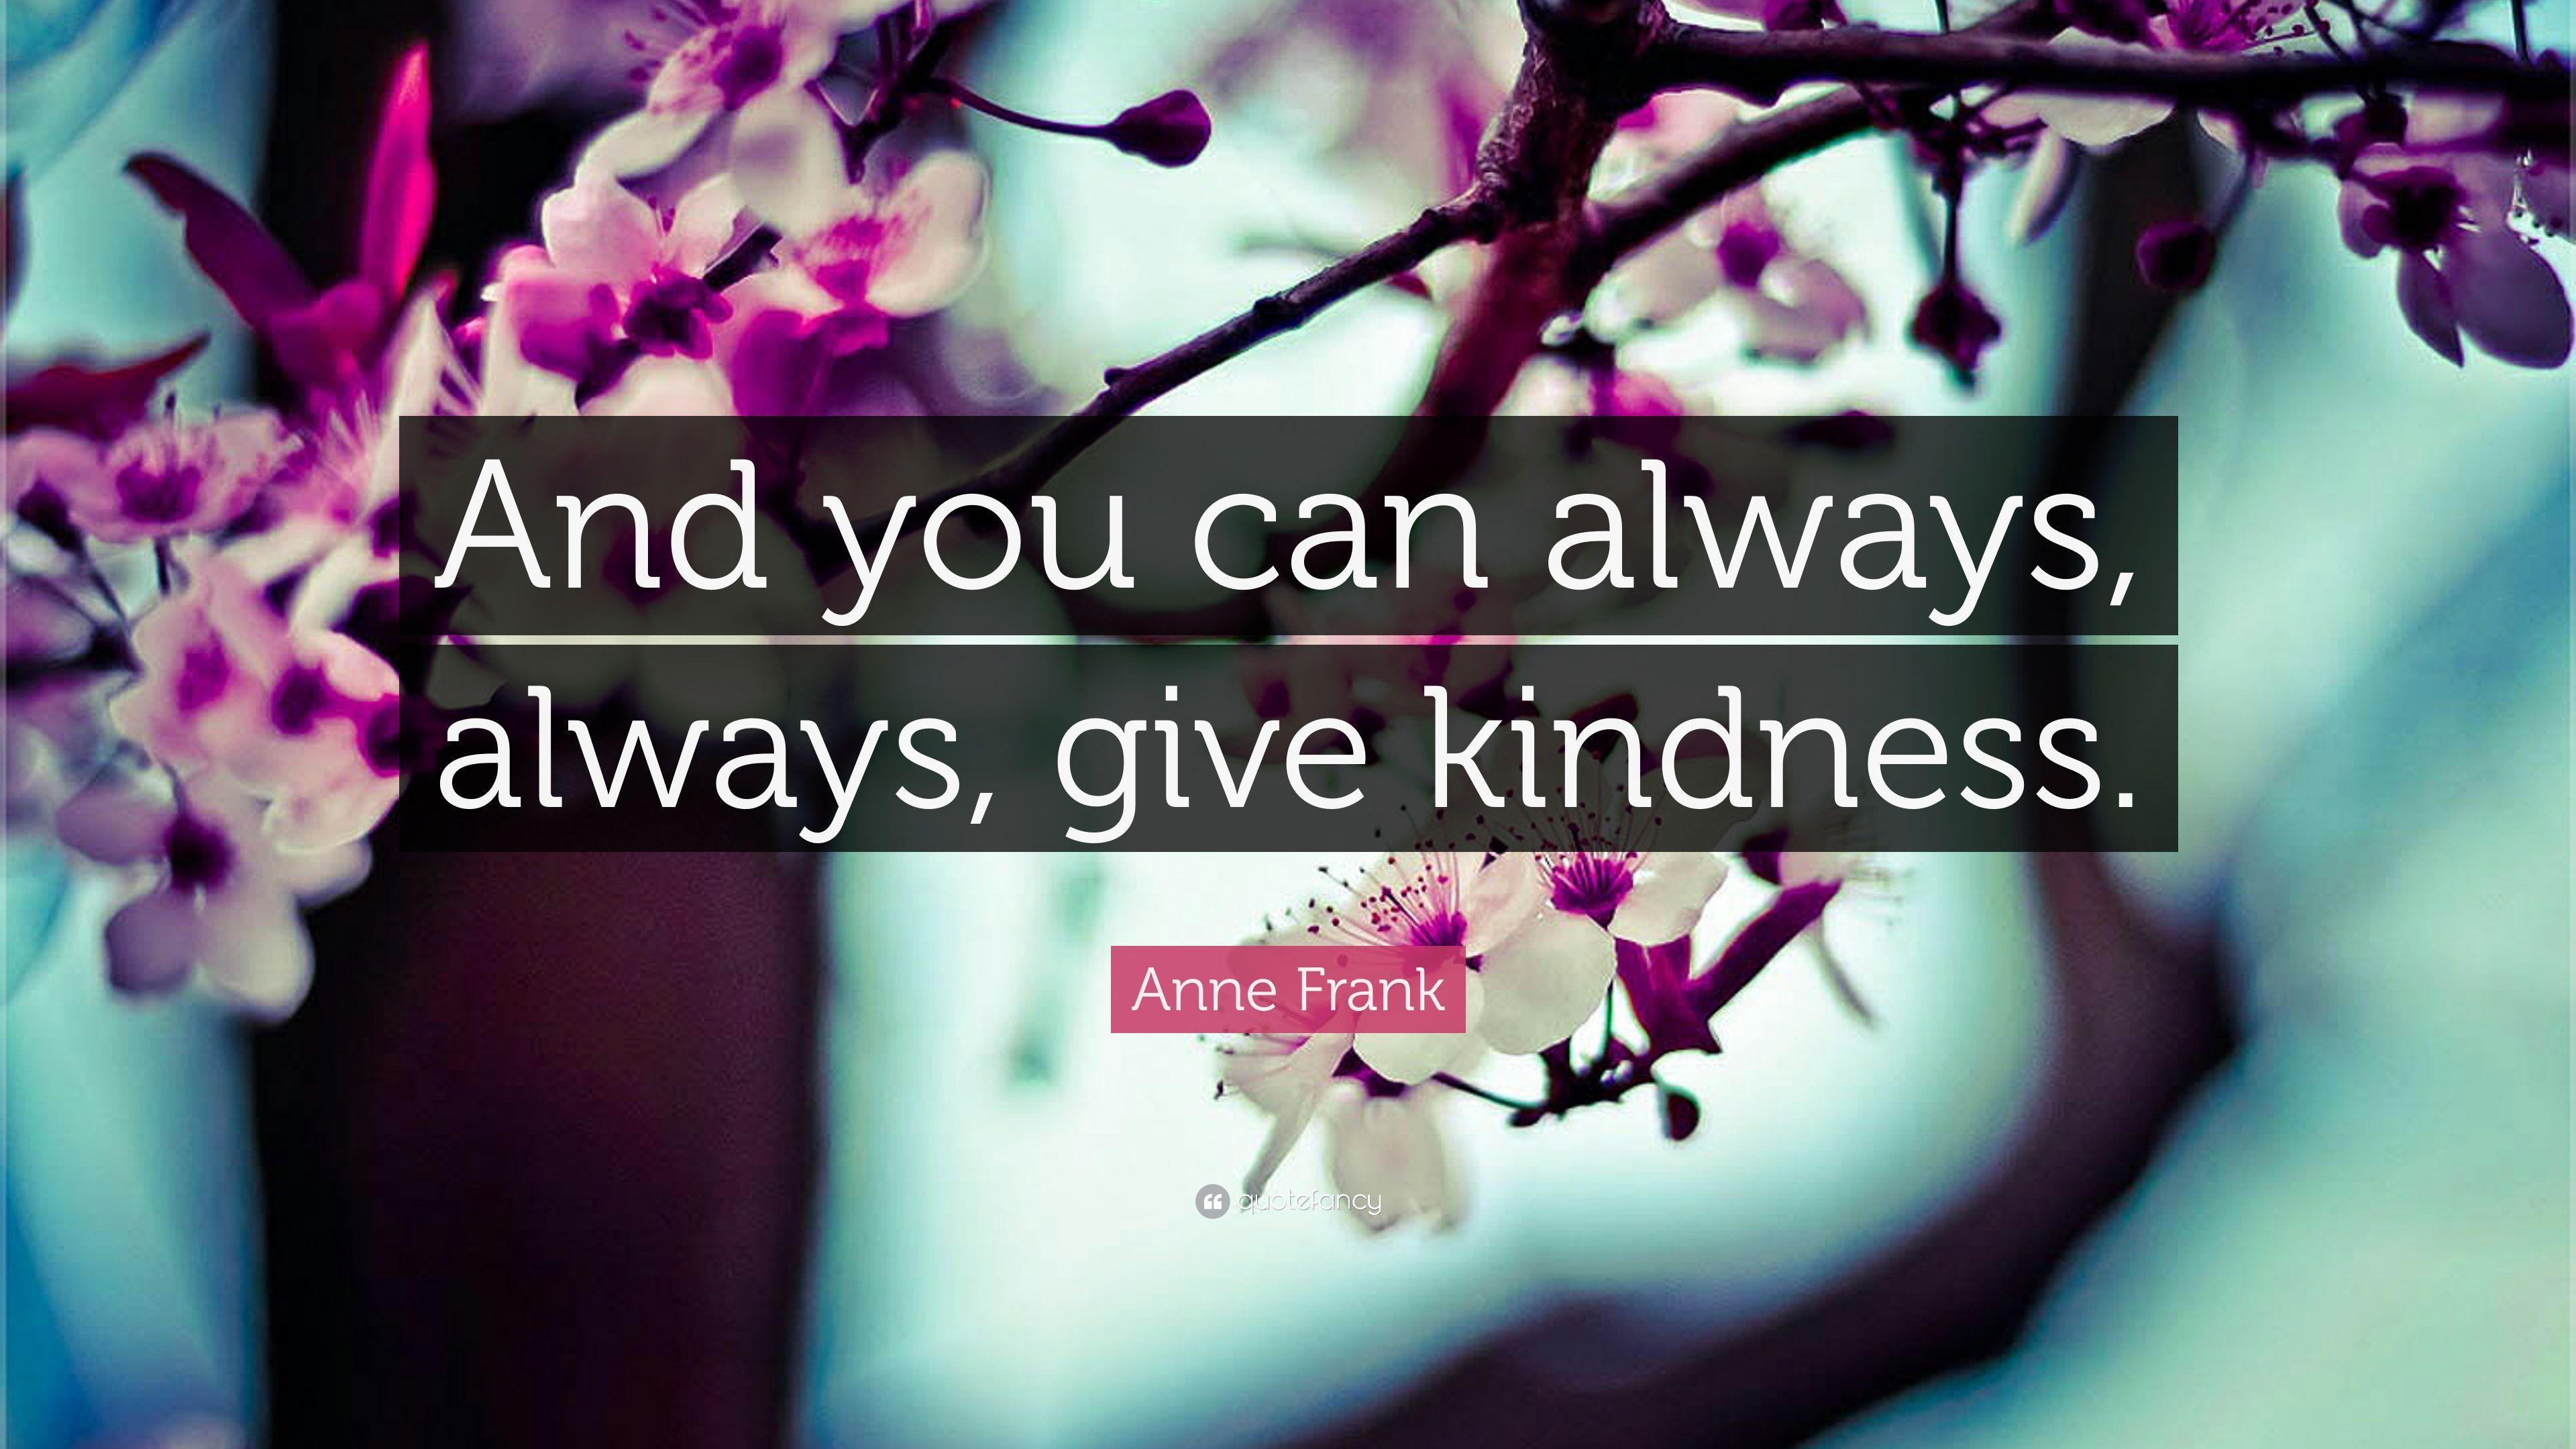 Anne Frank Quote: “And you can always, always, give kindness.” 12